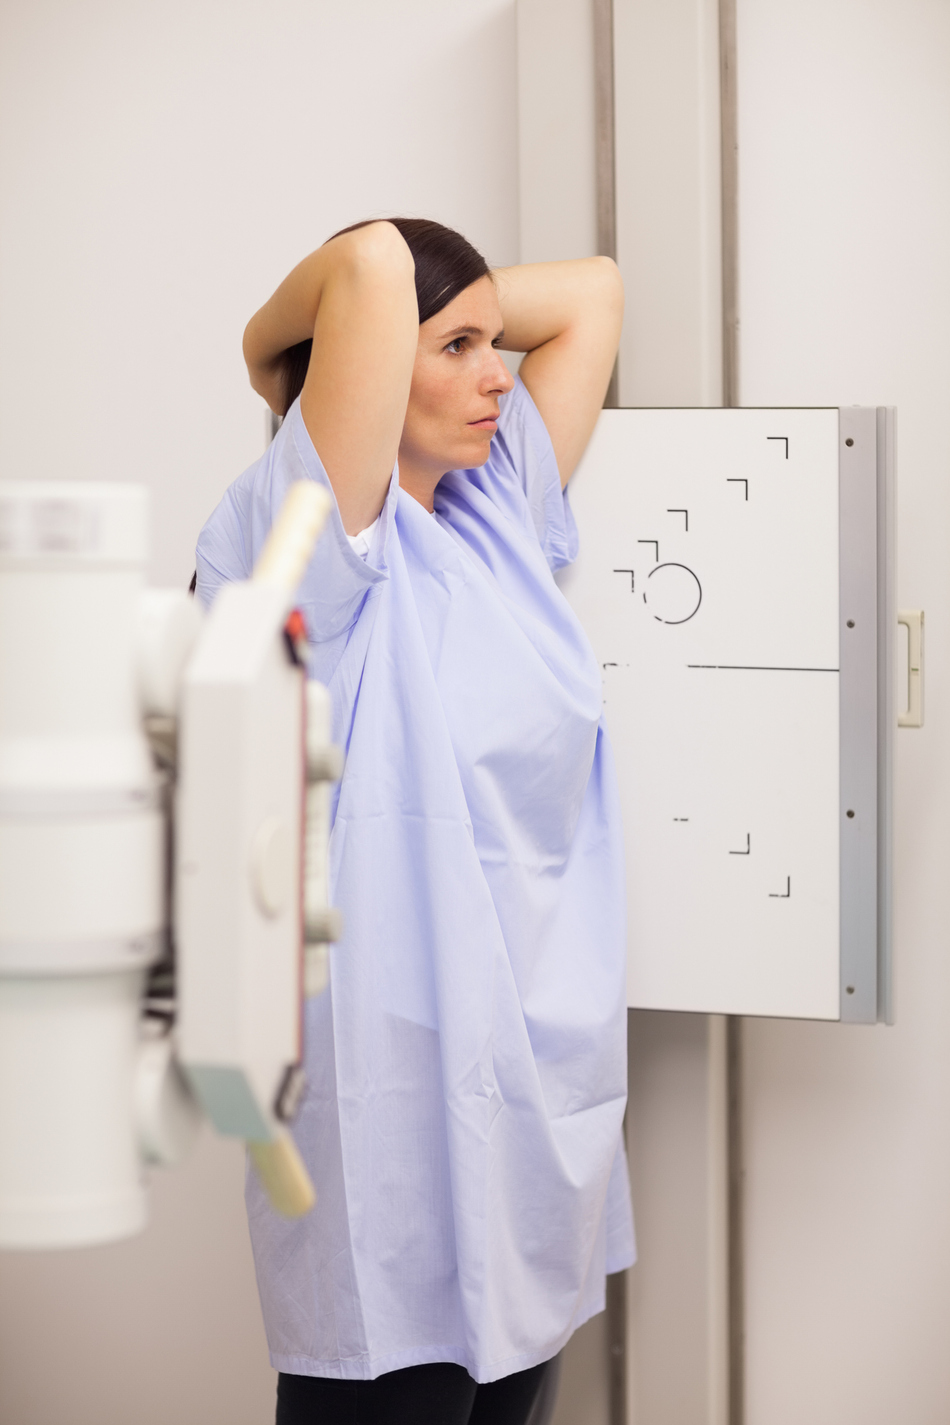 At What Age Should Women Start Mammograms?